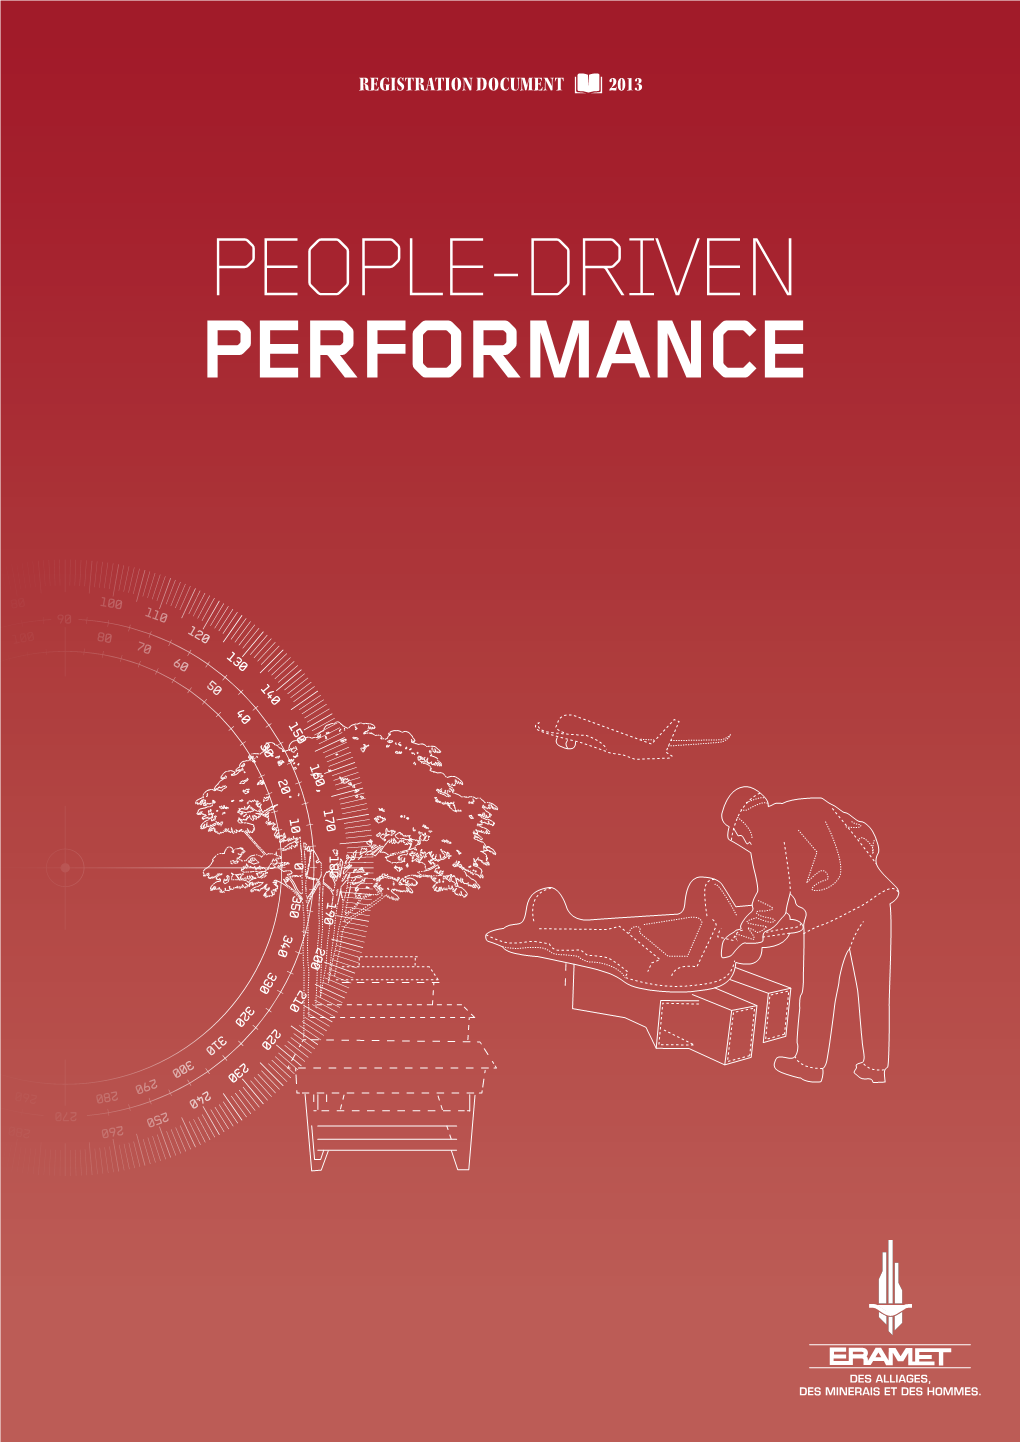 PEOPLE-DRIVEN PERFORMANCE Contents